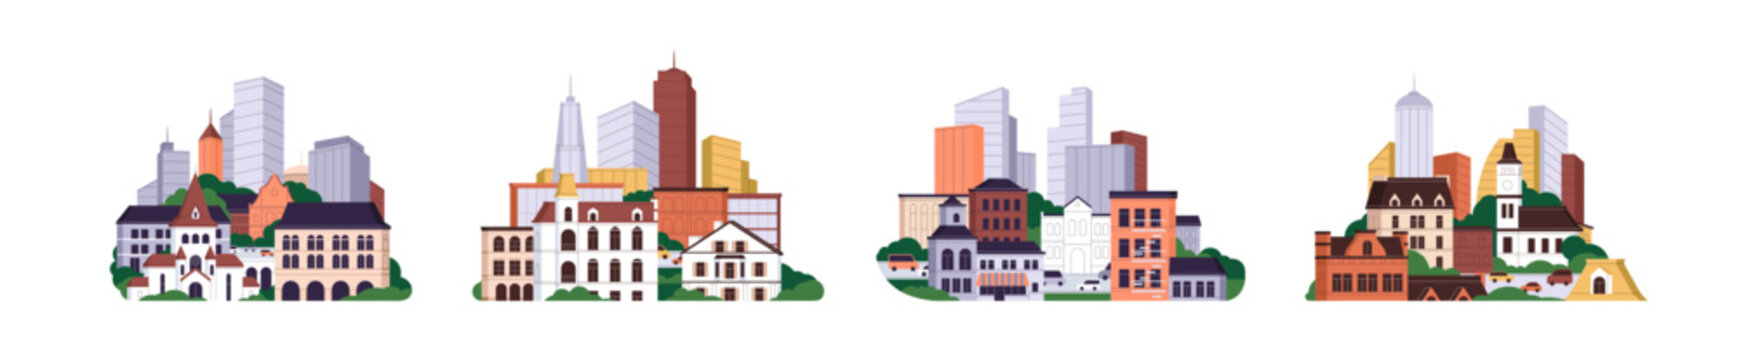 Cityscapes set, city buildings. Urban constructions with modern and old architecture, real estate in downtown. Skyscrapers, low houses facades. Flat vector illustrations isolated on white background